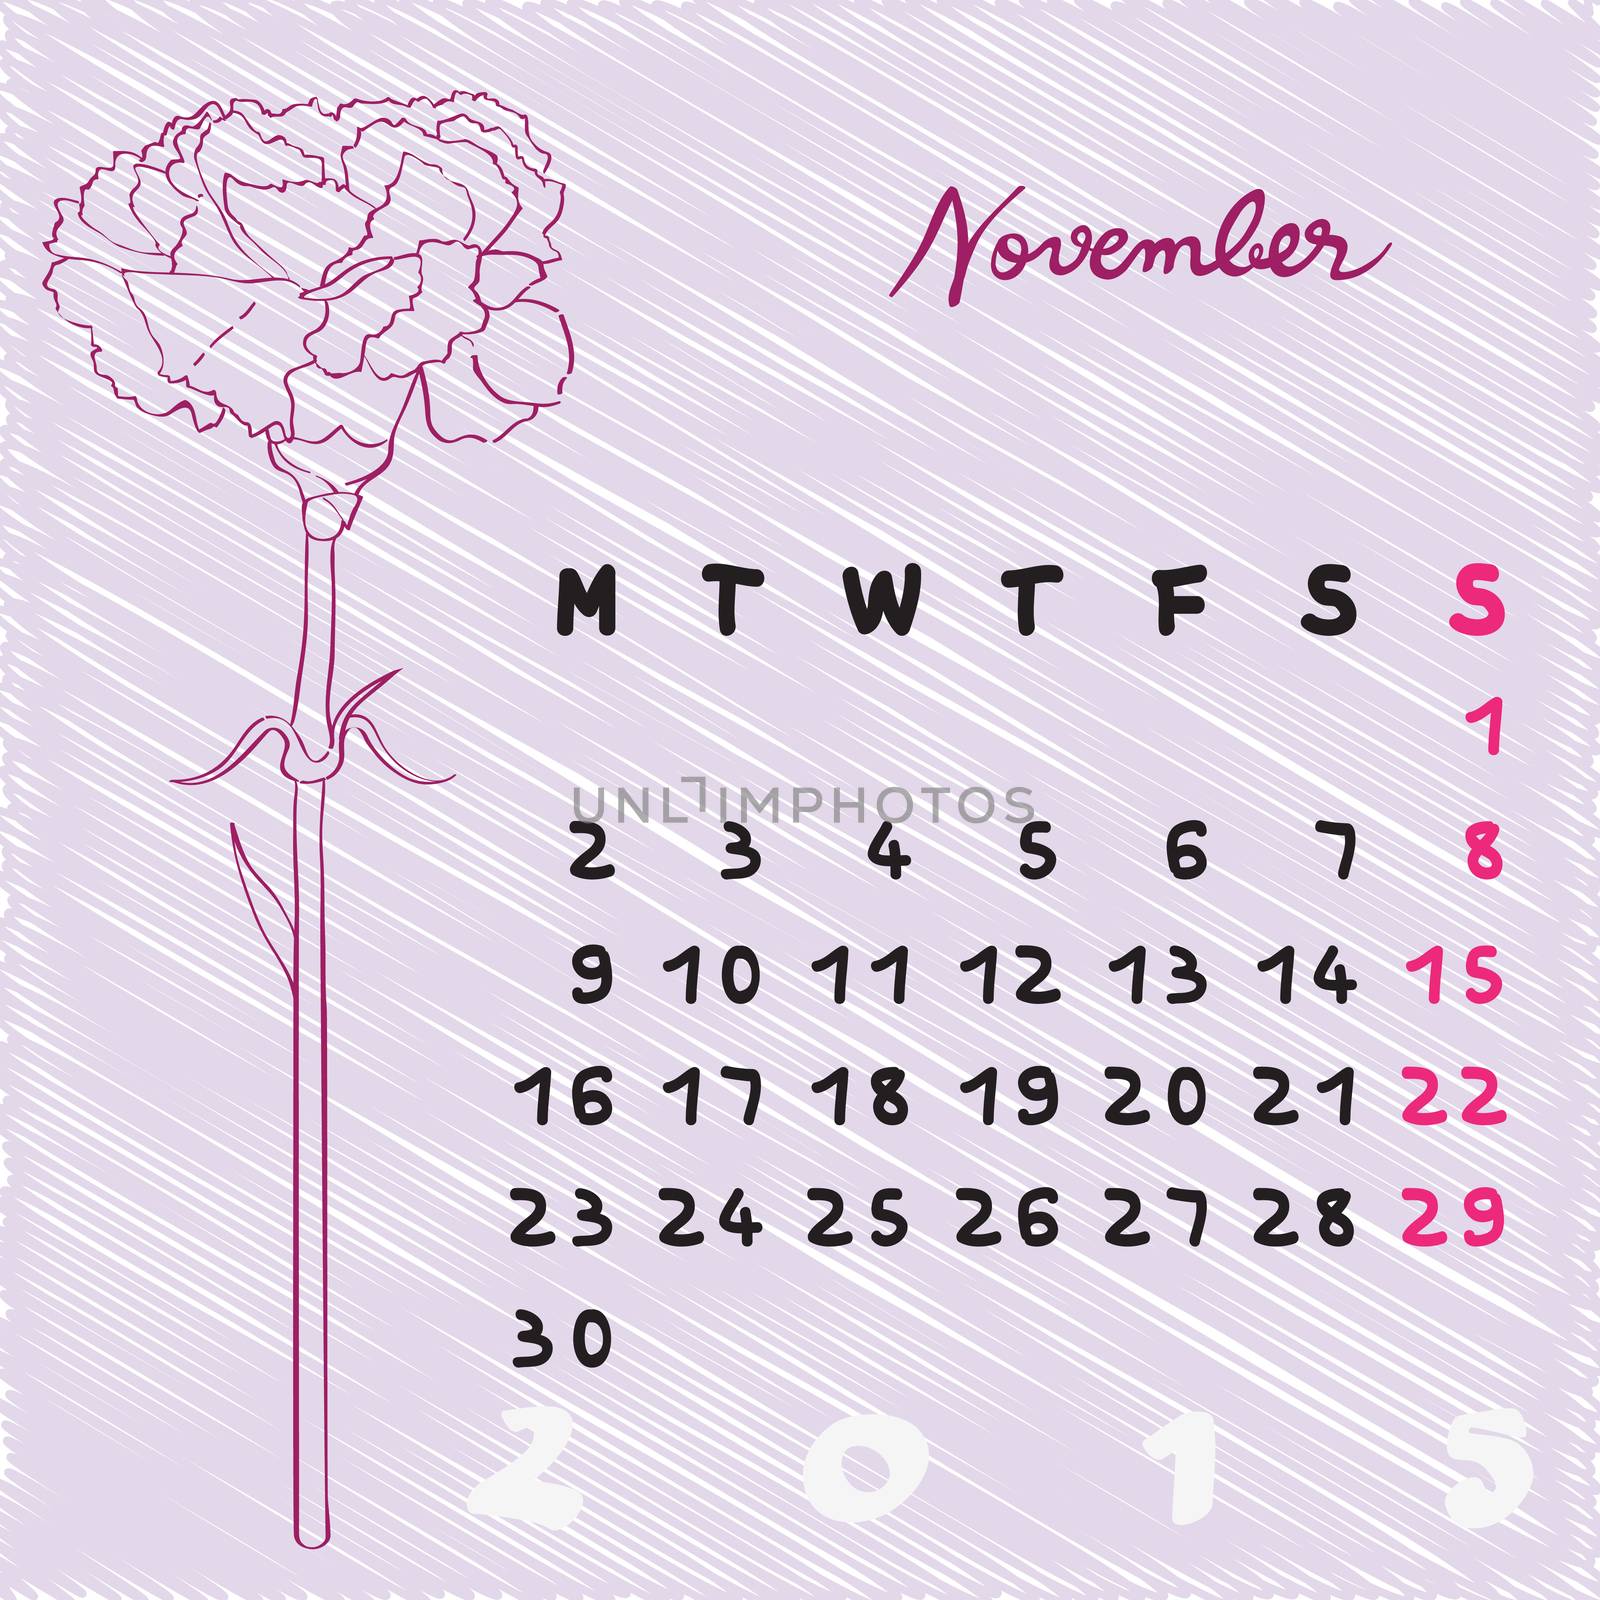 Calendar 2015, graphic illustration of November month calendar with original hand drawn text and carnation flower